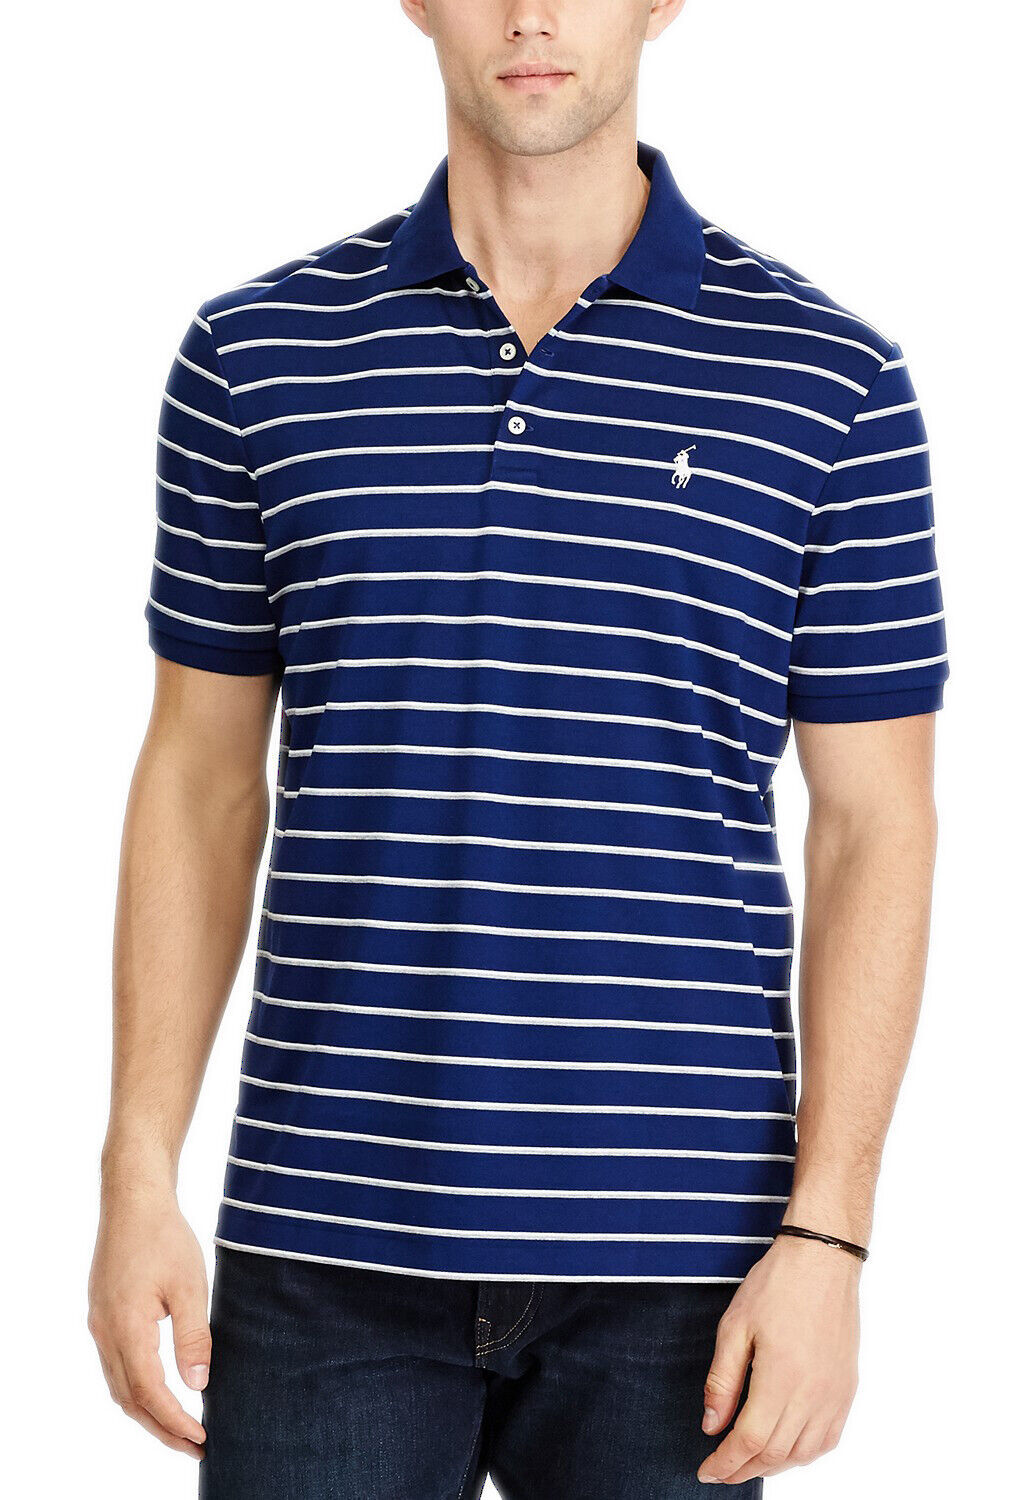 Primary image for Polo Ralph Lauren N Blue Striped Classic Fit Striped Polo Shirt, L Large 3235-6